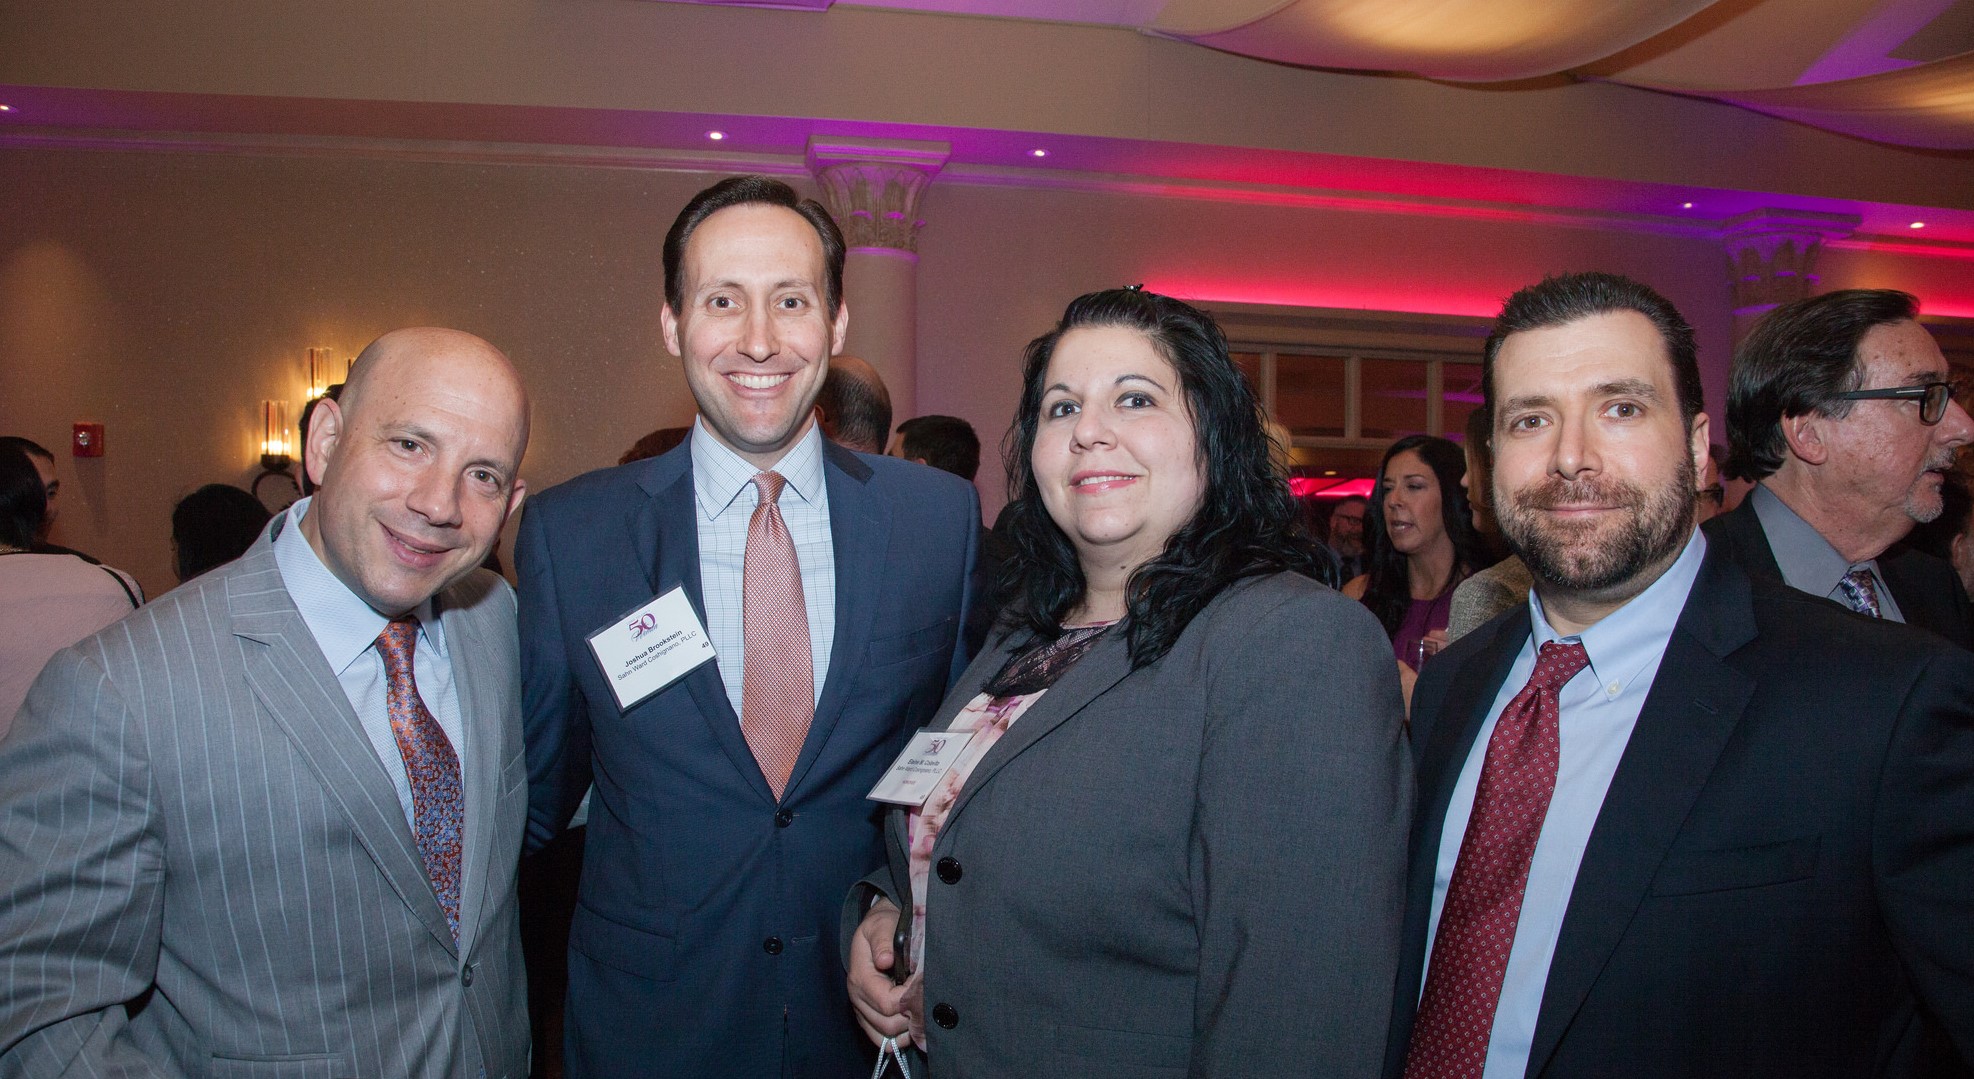 Firm Partner Elaine Colavito (second from right) is joined by (left to right) Firm Partner Robert Abiuso, Firm Associate Joshua D. Brookstein, and Firm Partner Ralph Branciforte.